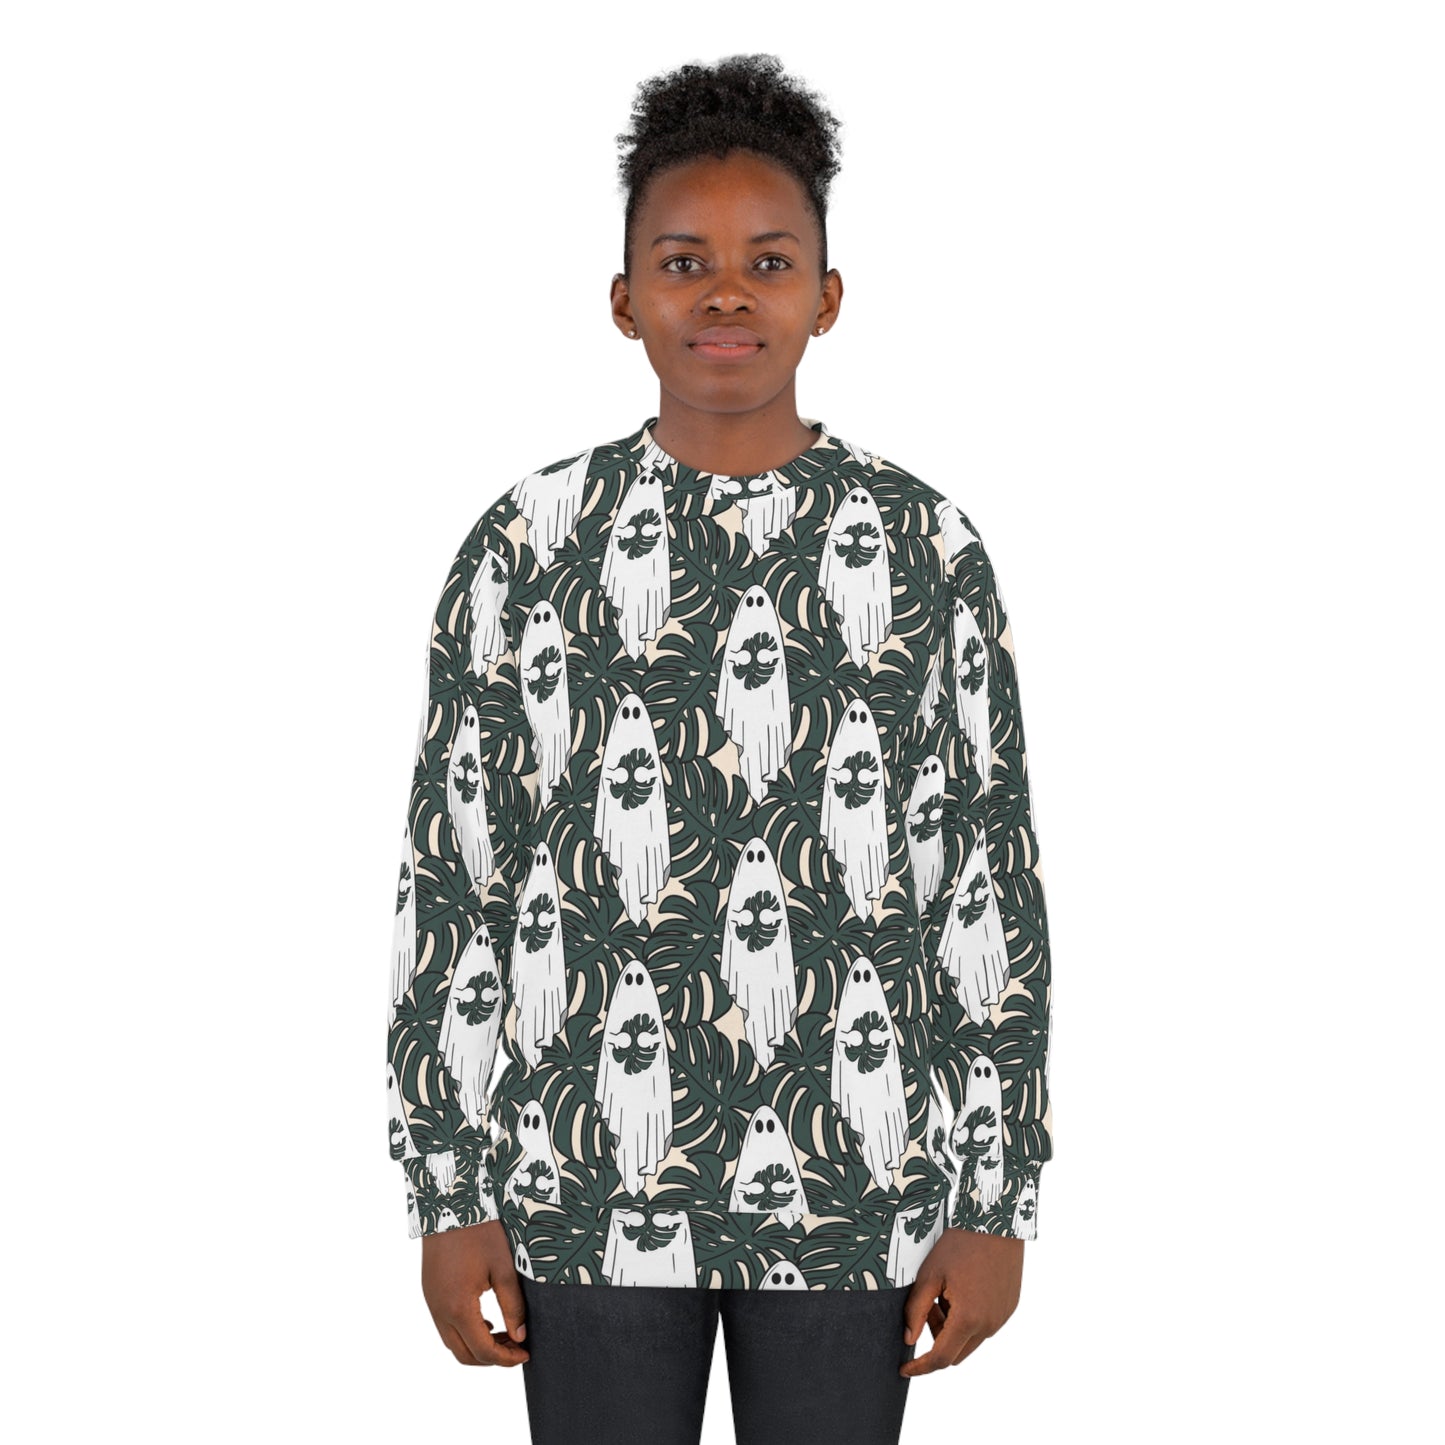 Monstera leaves and cute ghost Unisex Sweatshirt for plant lover and Halloween lover. LIMITED TIME.